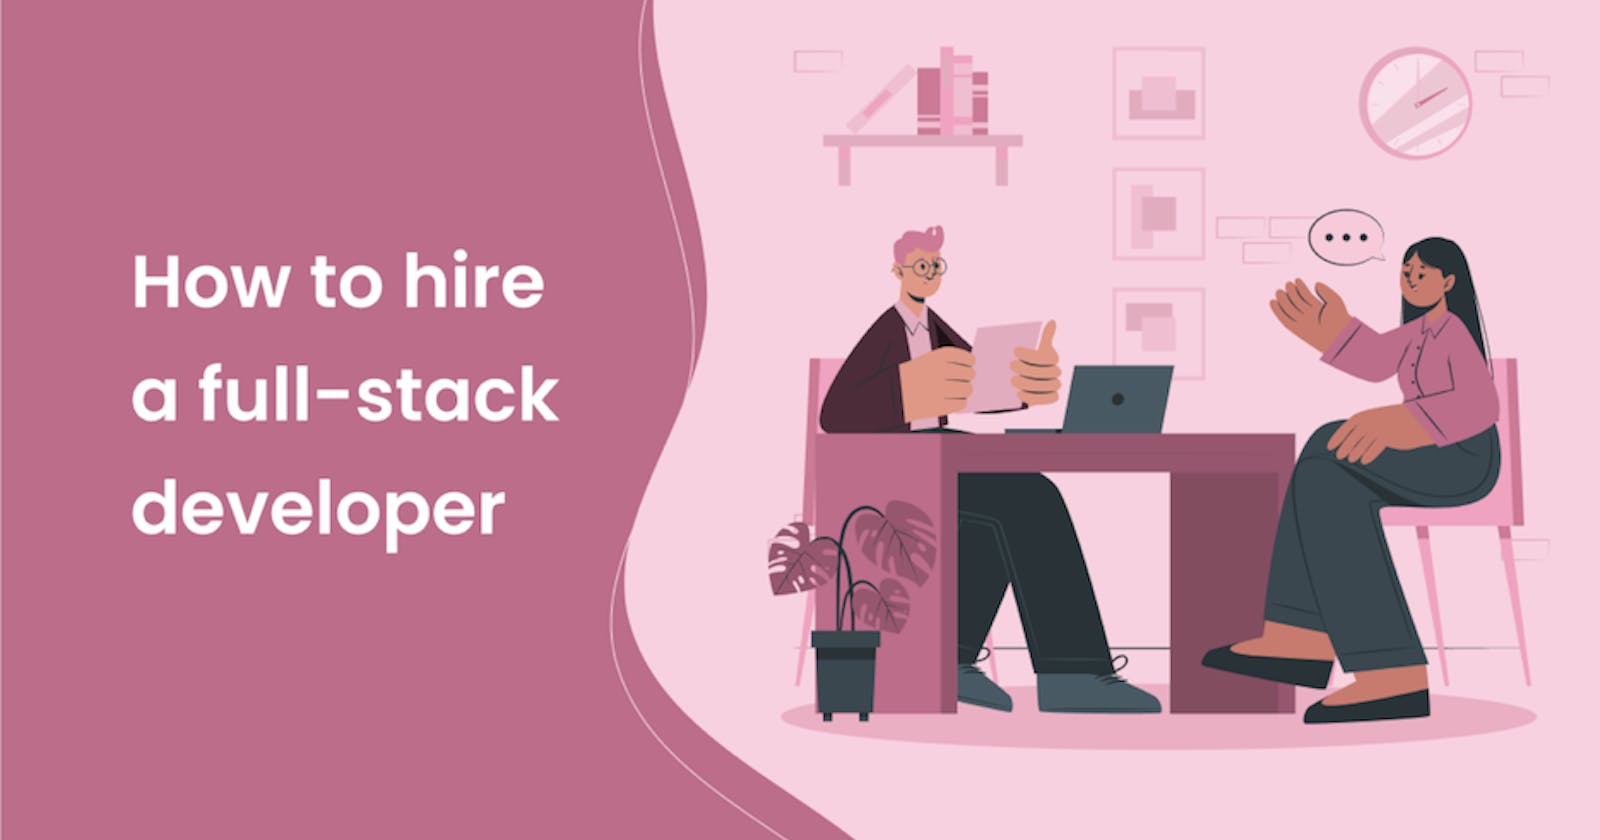 Quick and Easy Steps to Hire Full Stack Developers